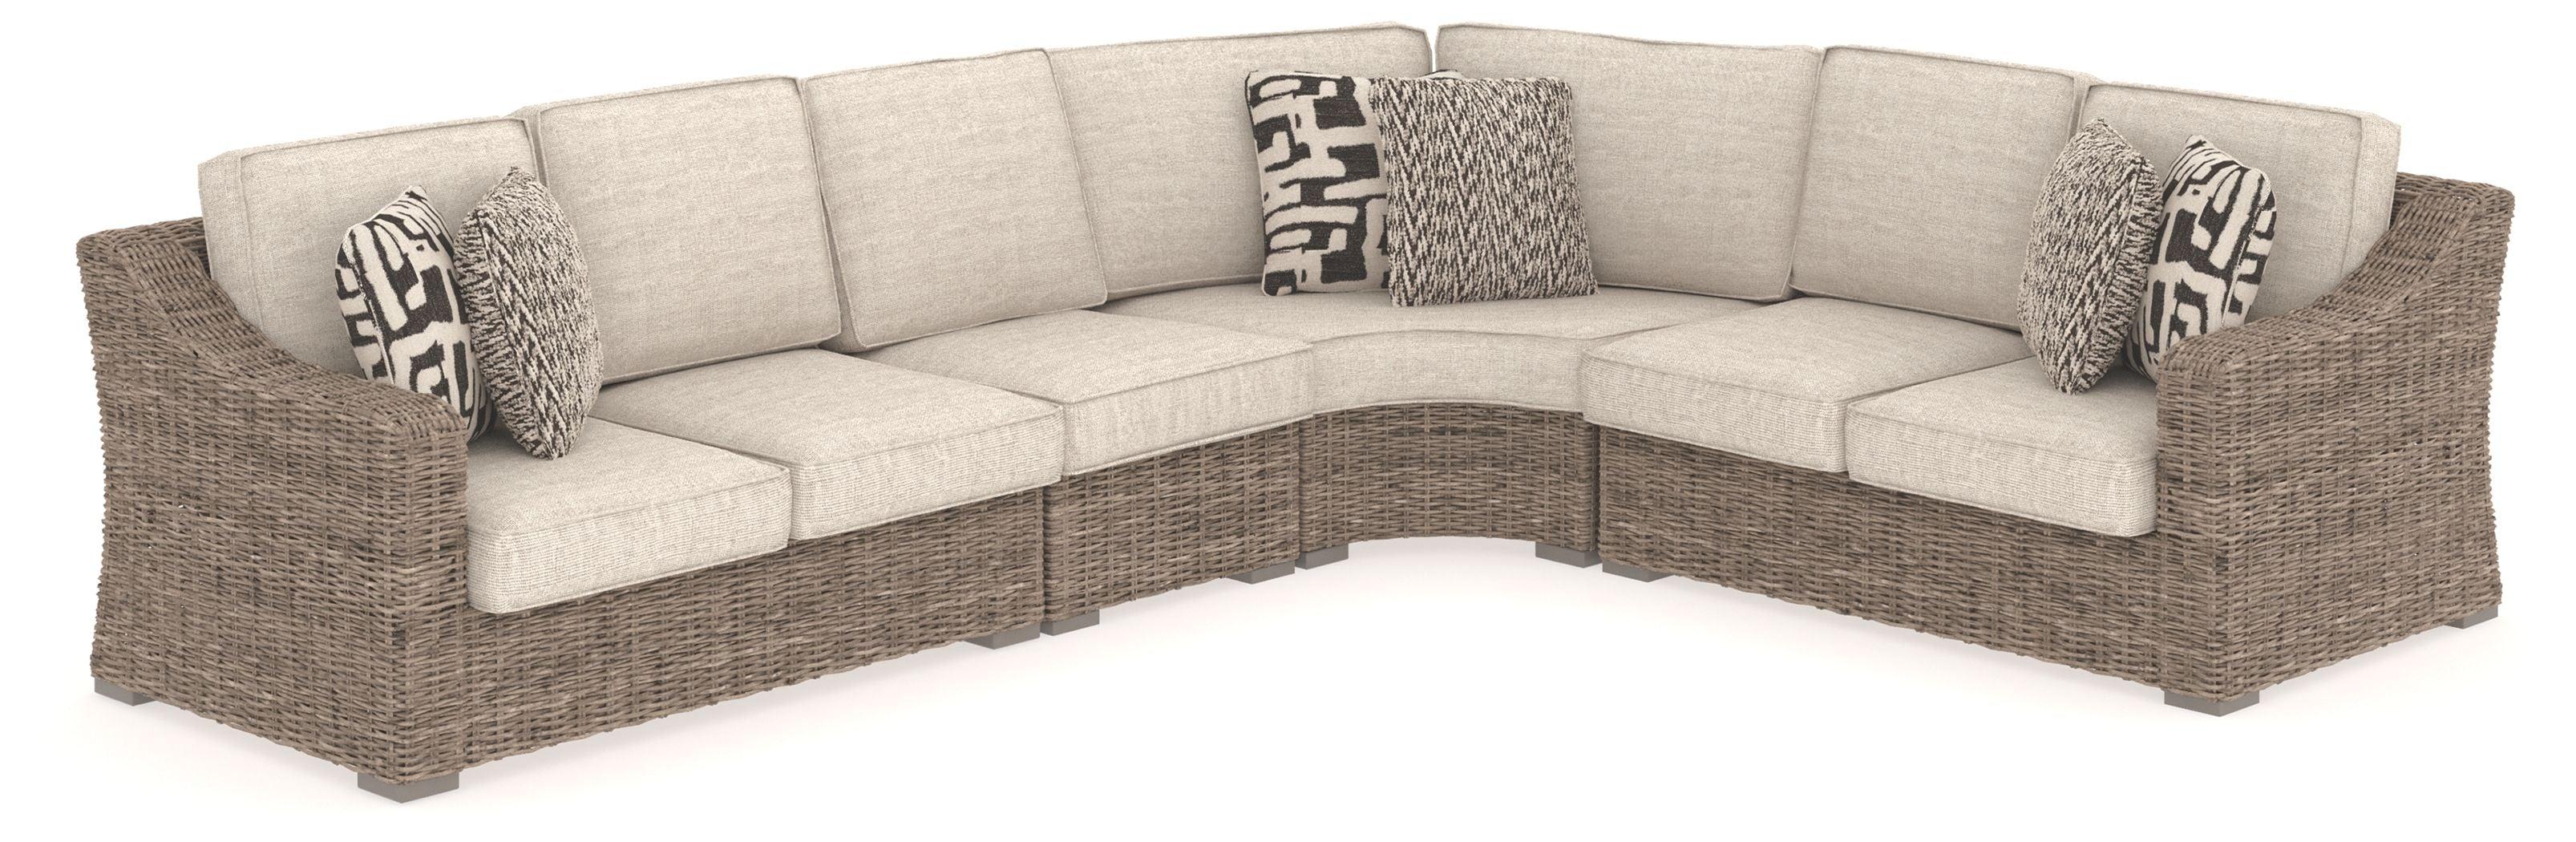 Signature Design by Ashley® - Beachcroft - Sectional Lounge - 5th Avenue Furniture